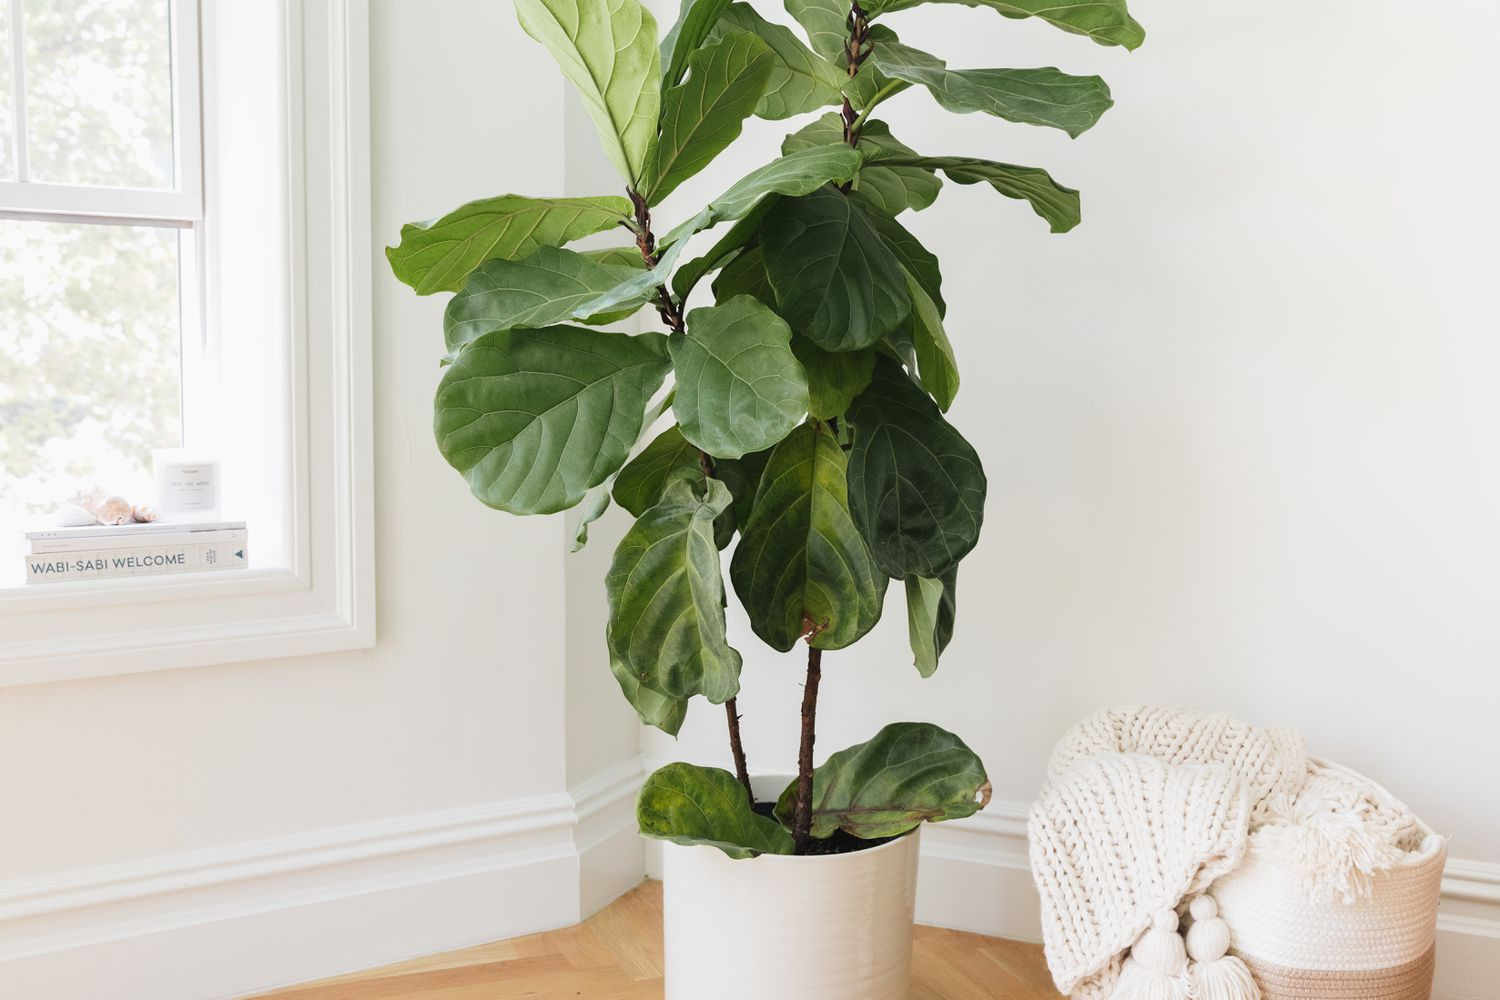 How To Grow And Care For Fiddle Leaf Fig